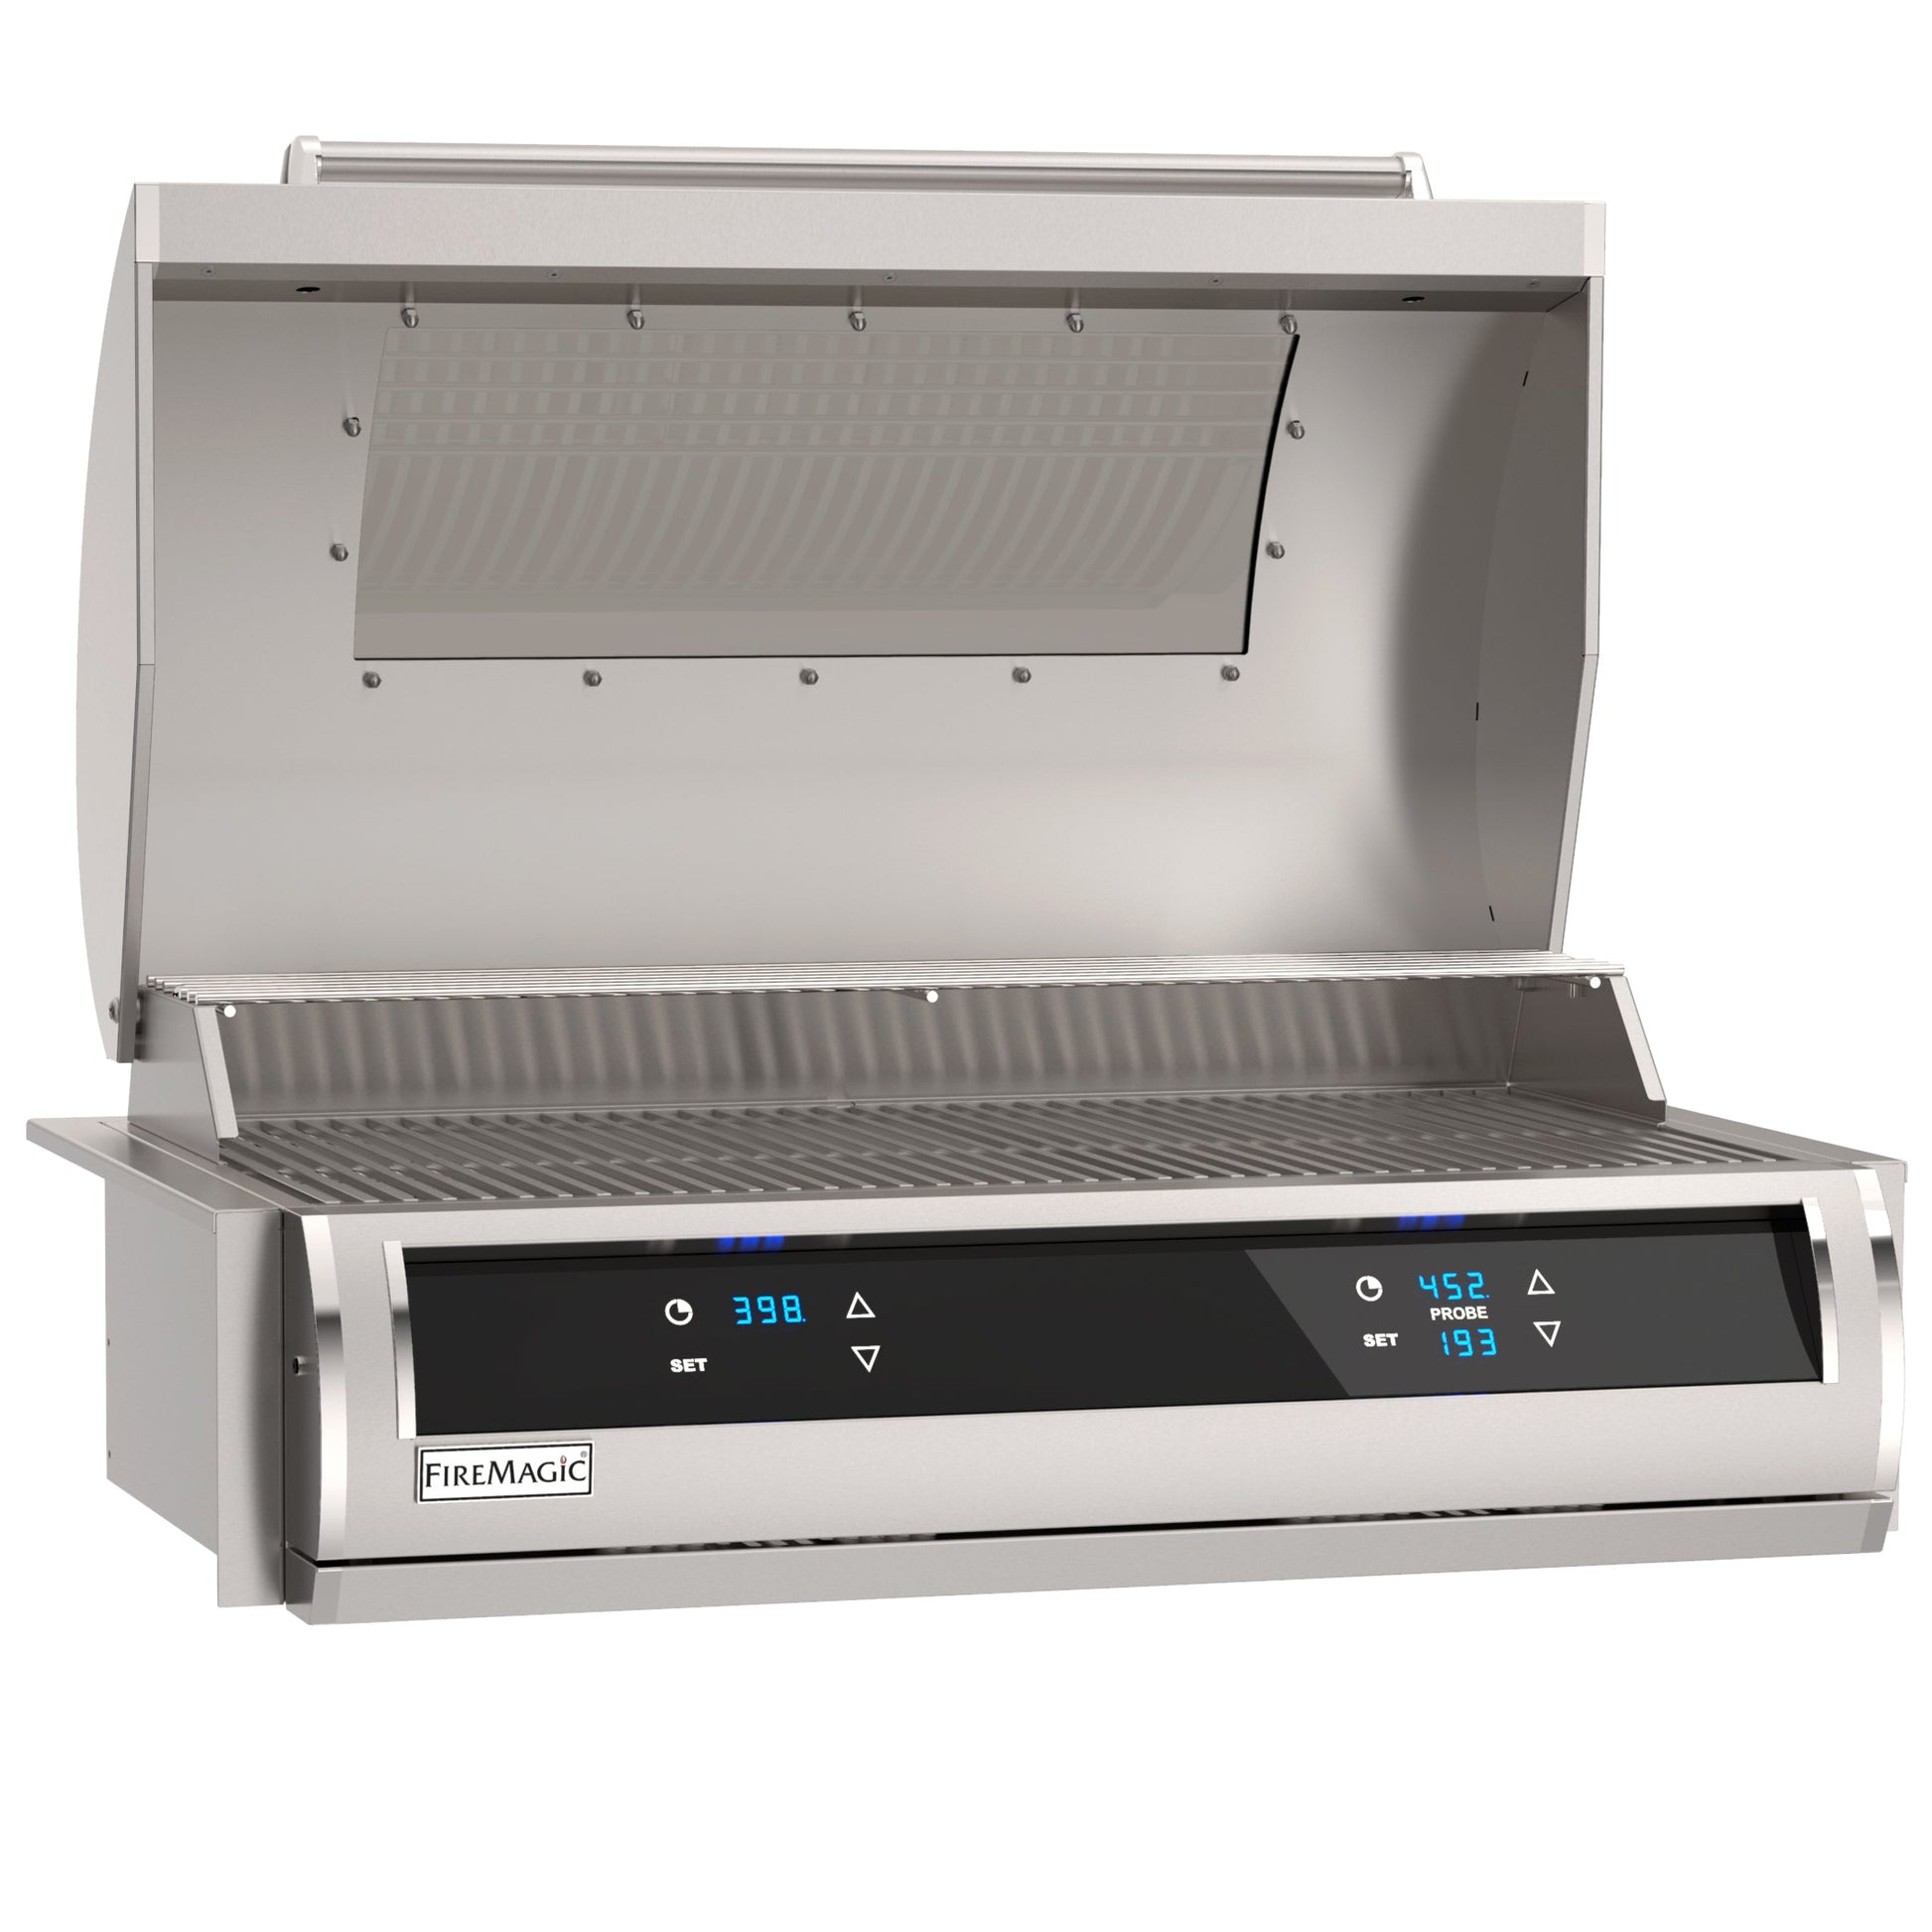 Fire Magic EL500i 30" Built-In Electric Grill With Dual Control and Window